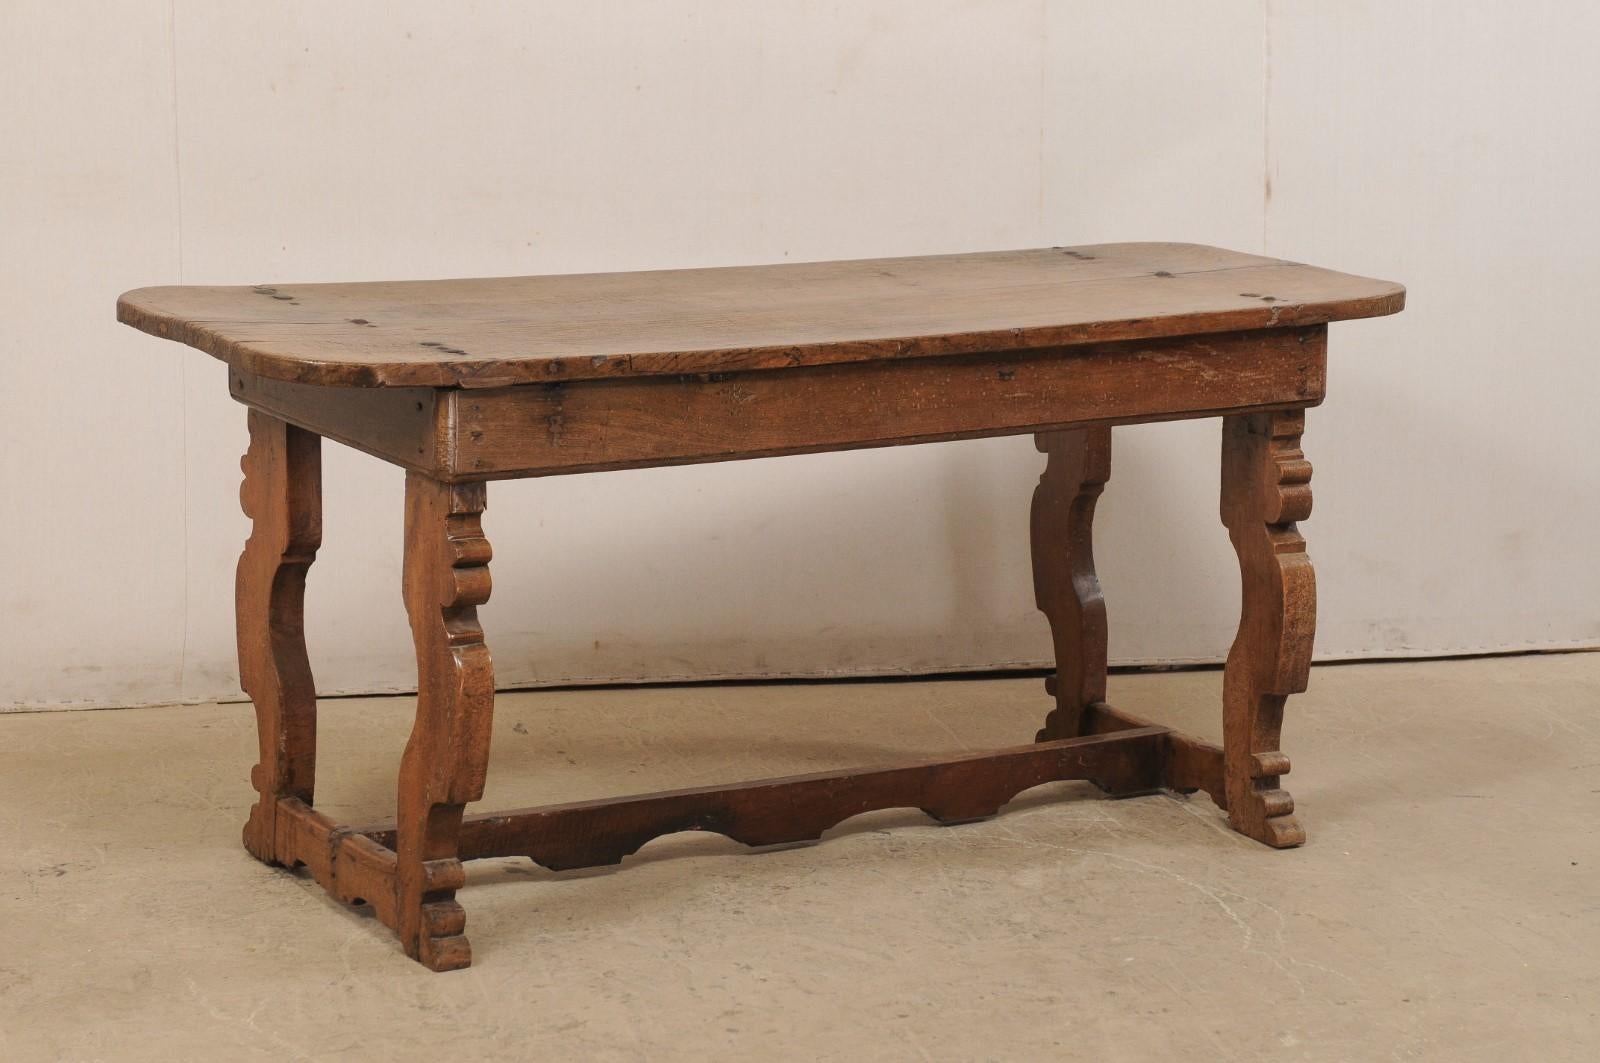 An Italian console table, or desk, with single board top and trestle legs from the 18th century. This antique chestnut wood farm table from Italy features a single wood board plank top, attached to the cleanly designed apron with fabulous old thick